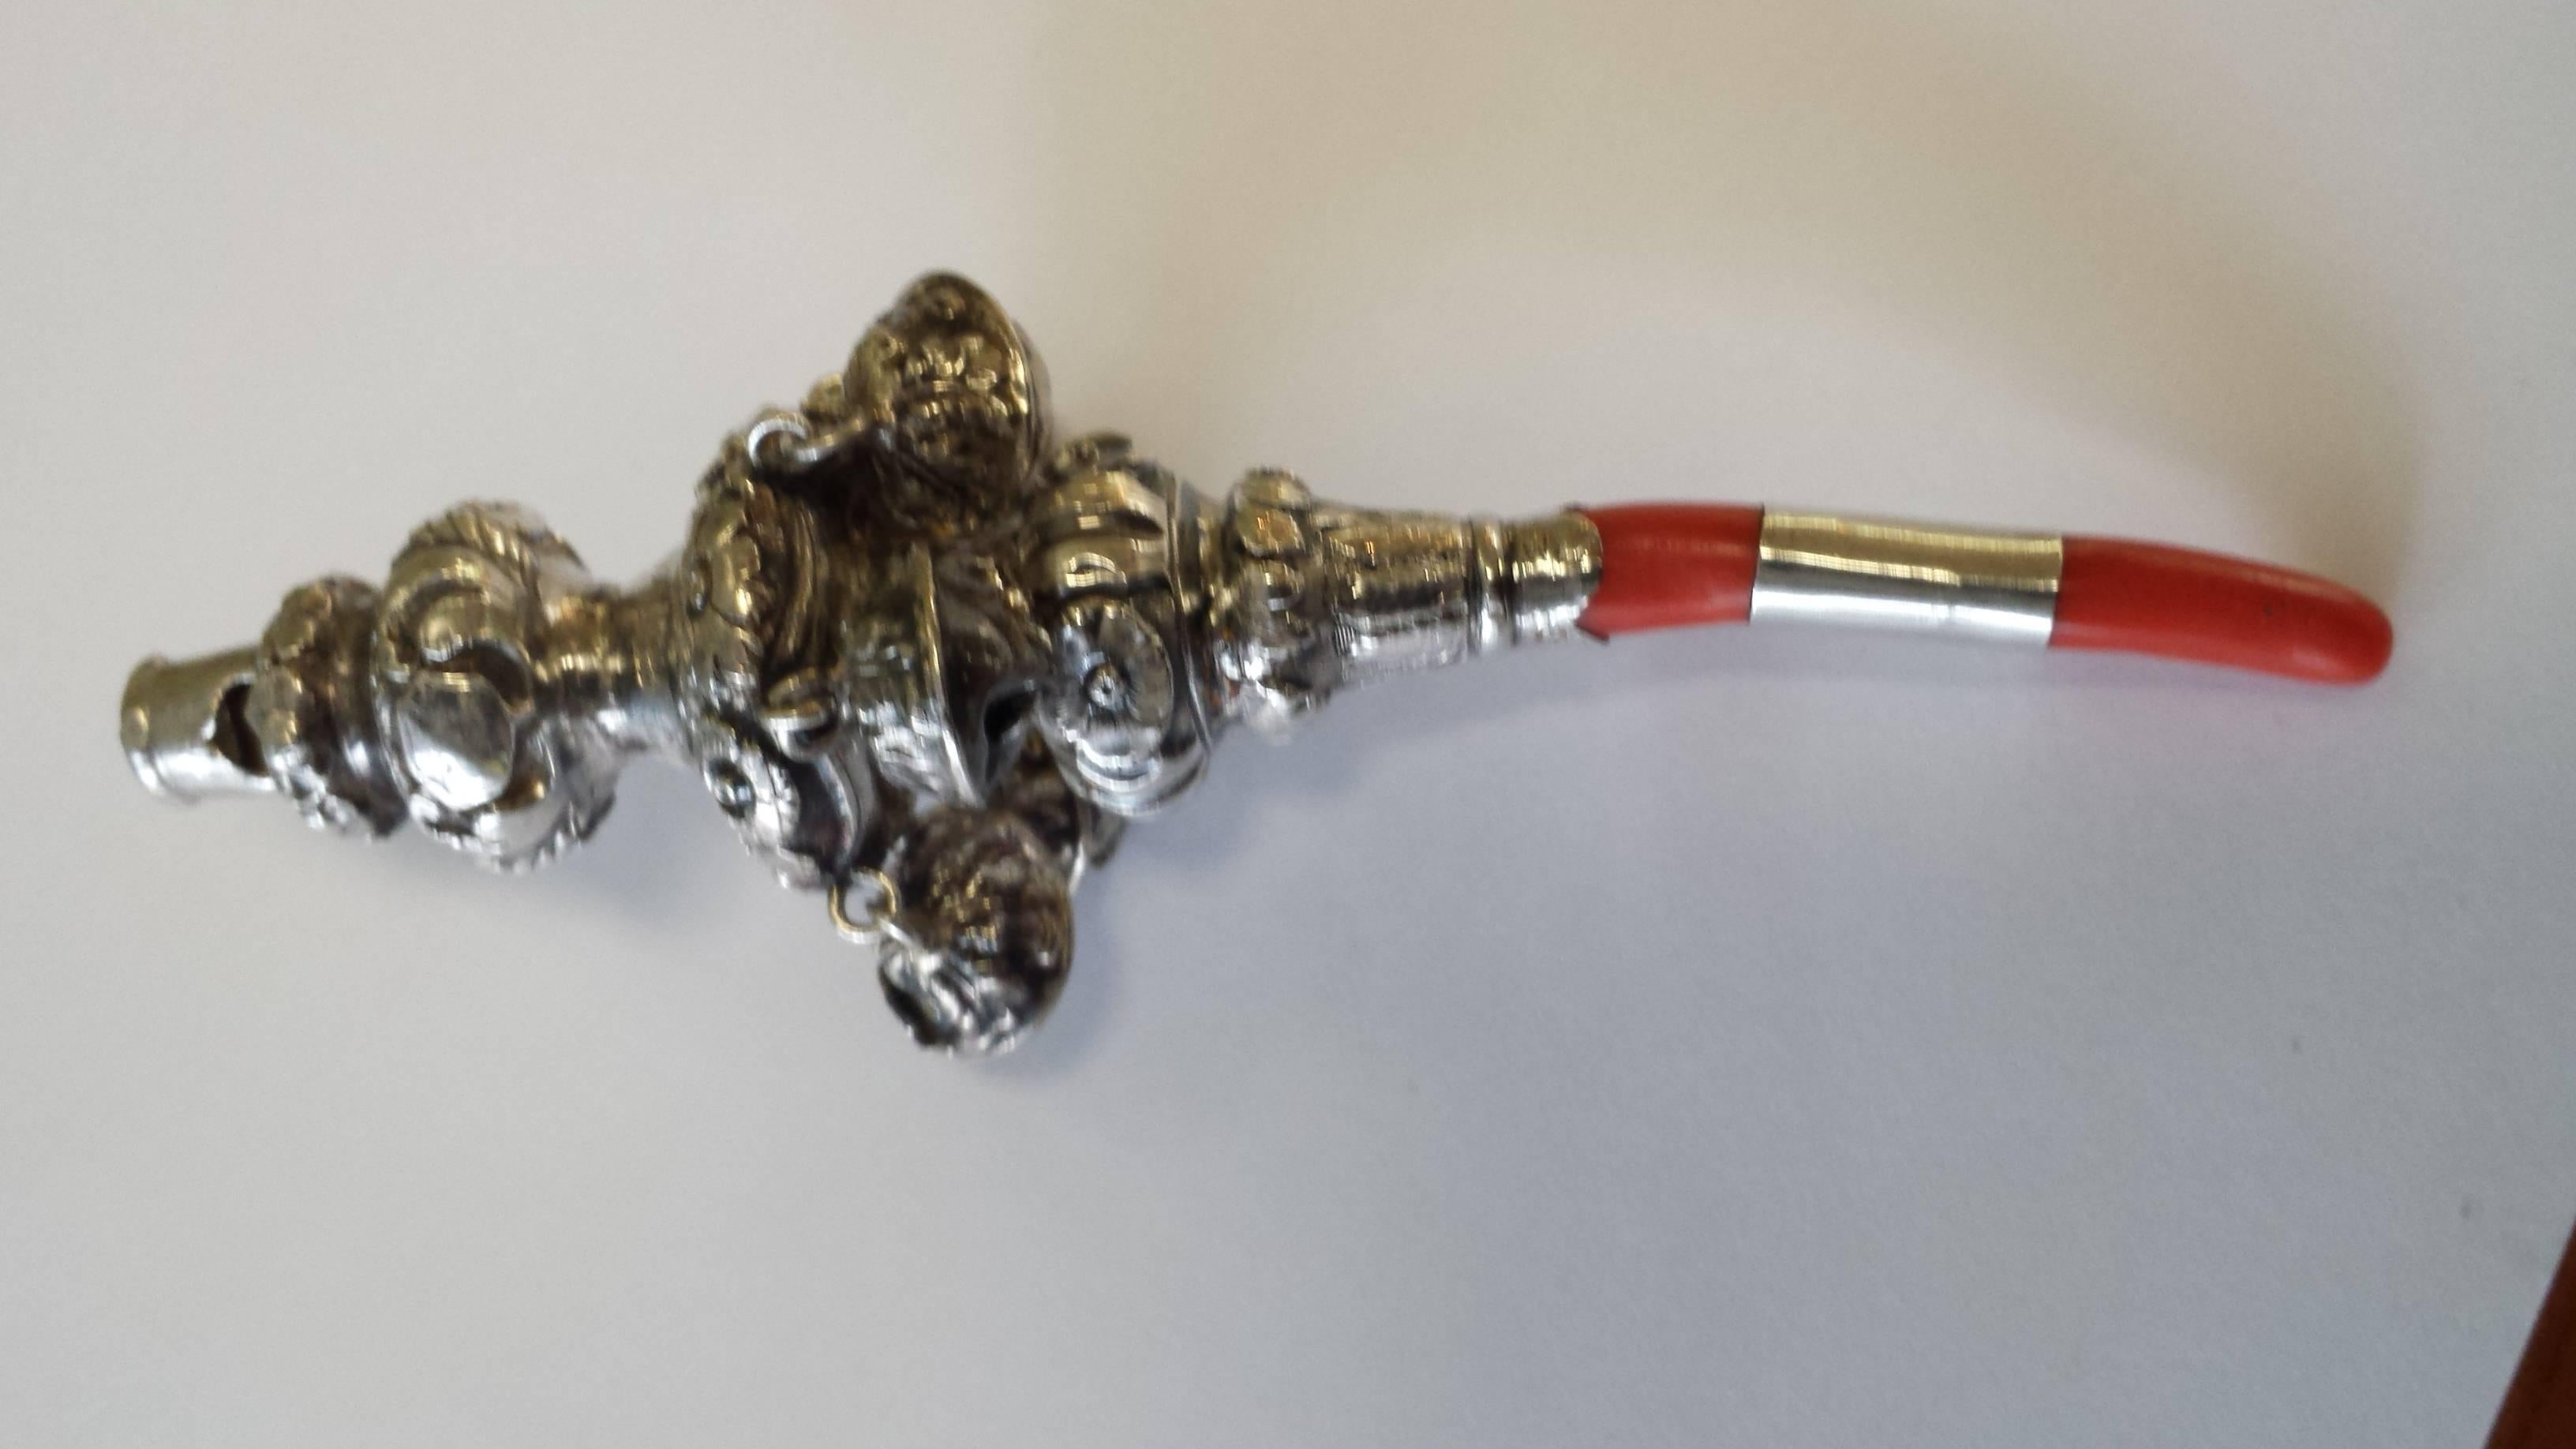 Late Georgian Coral & Sterling Silver Baby Rattle & Teether, Birmingham 1834/1835, Date letter is a K, The rattle has a whistle, chain ring, 6- bell's a band on coral stick teether for a monogram unsigned, Floral and leaf decoraction. The rattle is